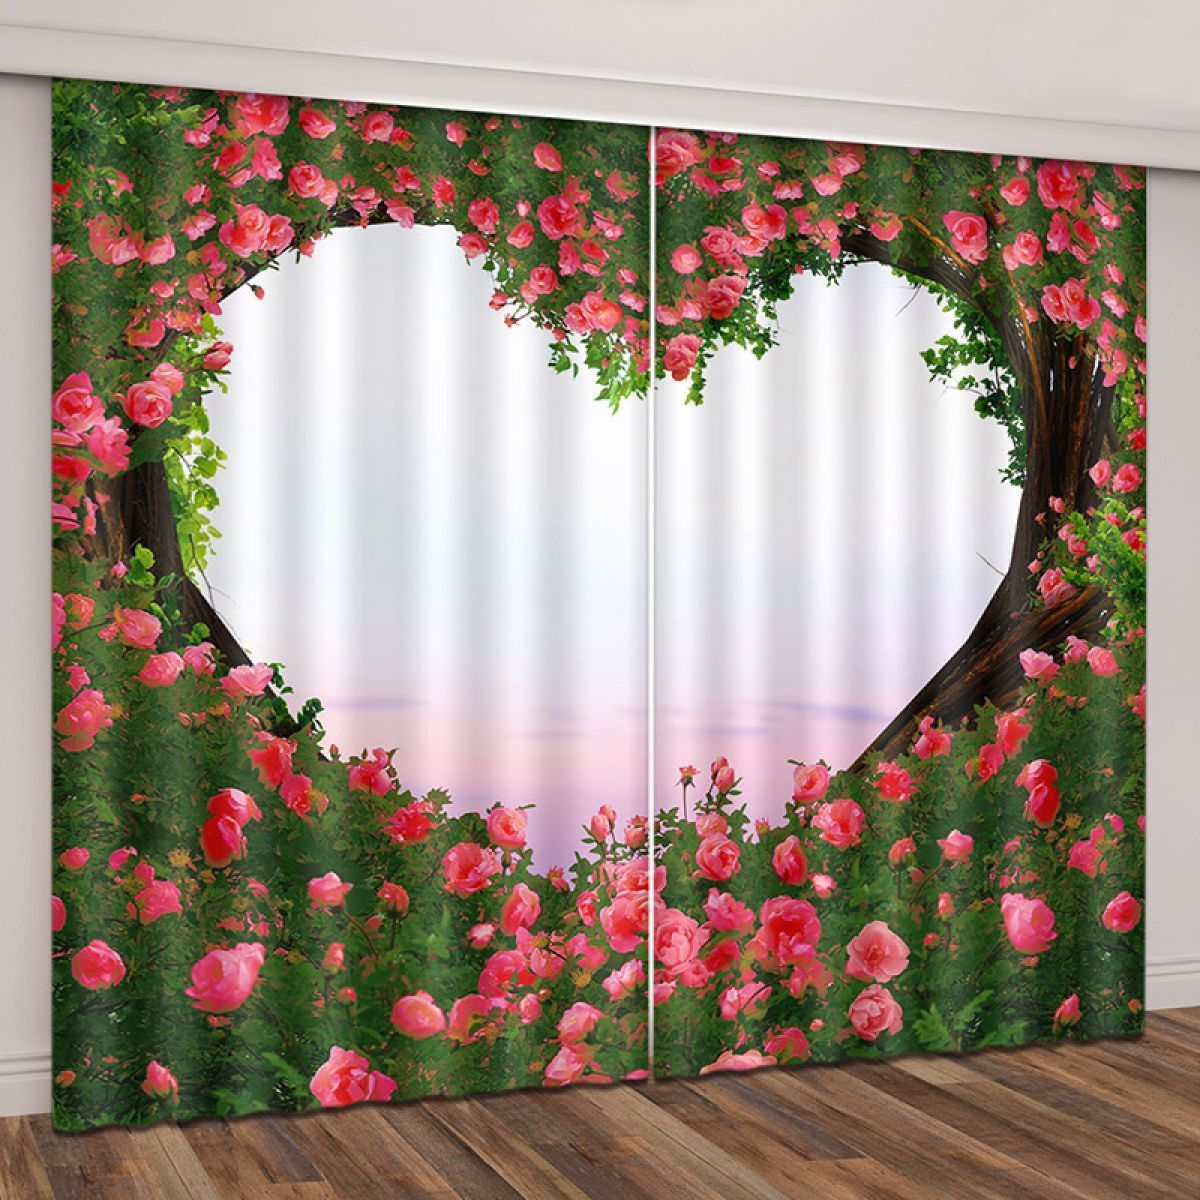 3d Heart Shape With Flowers Printed Window Curtain Home Decor